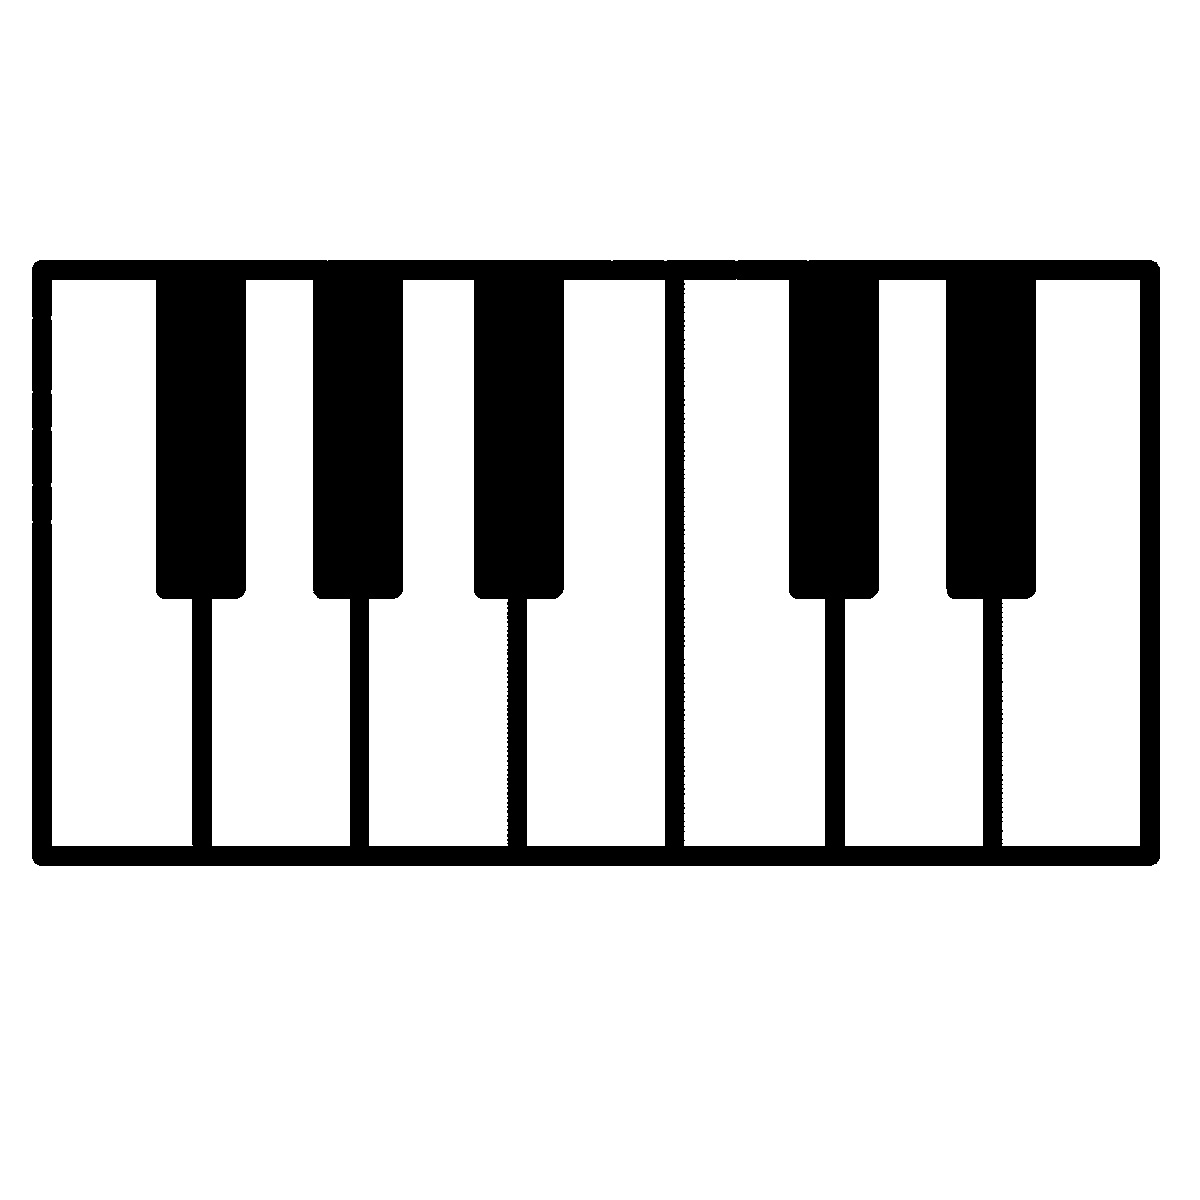 Piano Clipart Black And White   Clipart Panda   Free Clipart Images